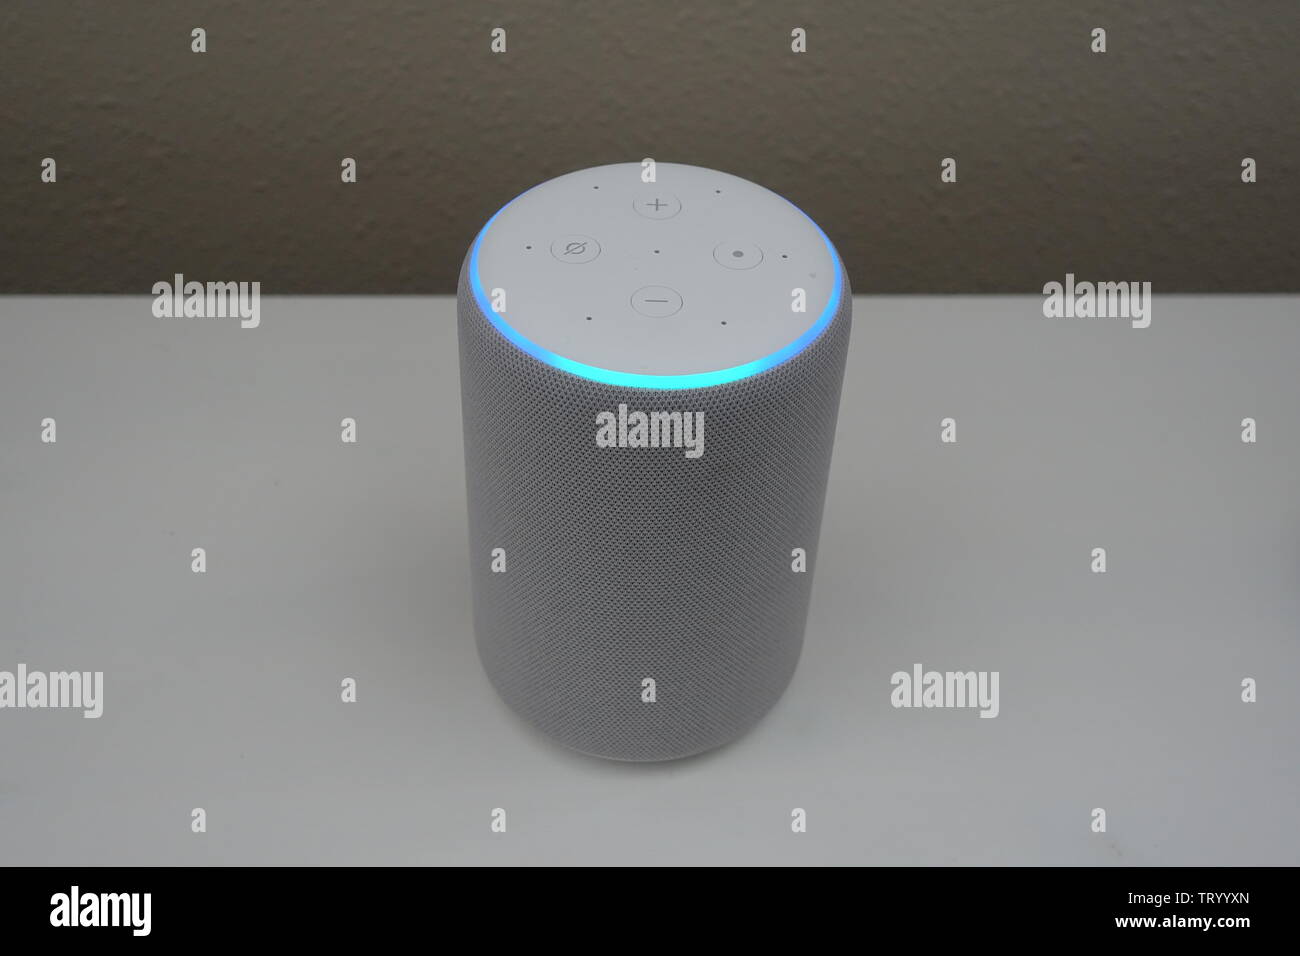 Orlando, FL/USA-5/17/19: An Amazon Alexa Echo, (known as Alexa, is a virtual assistant) sitting on a white background in listening mode. Stock Photo